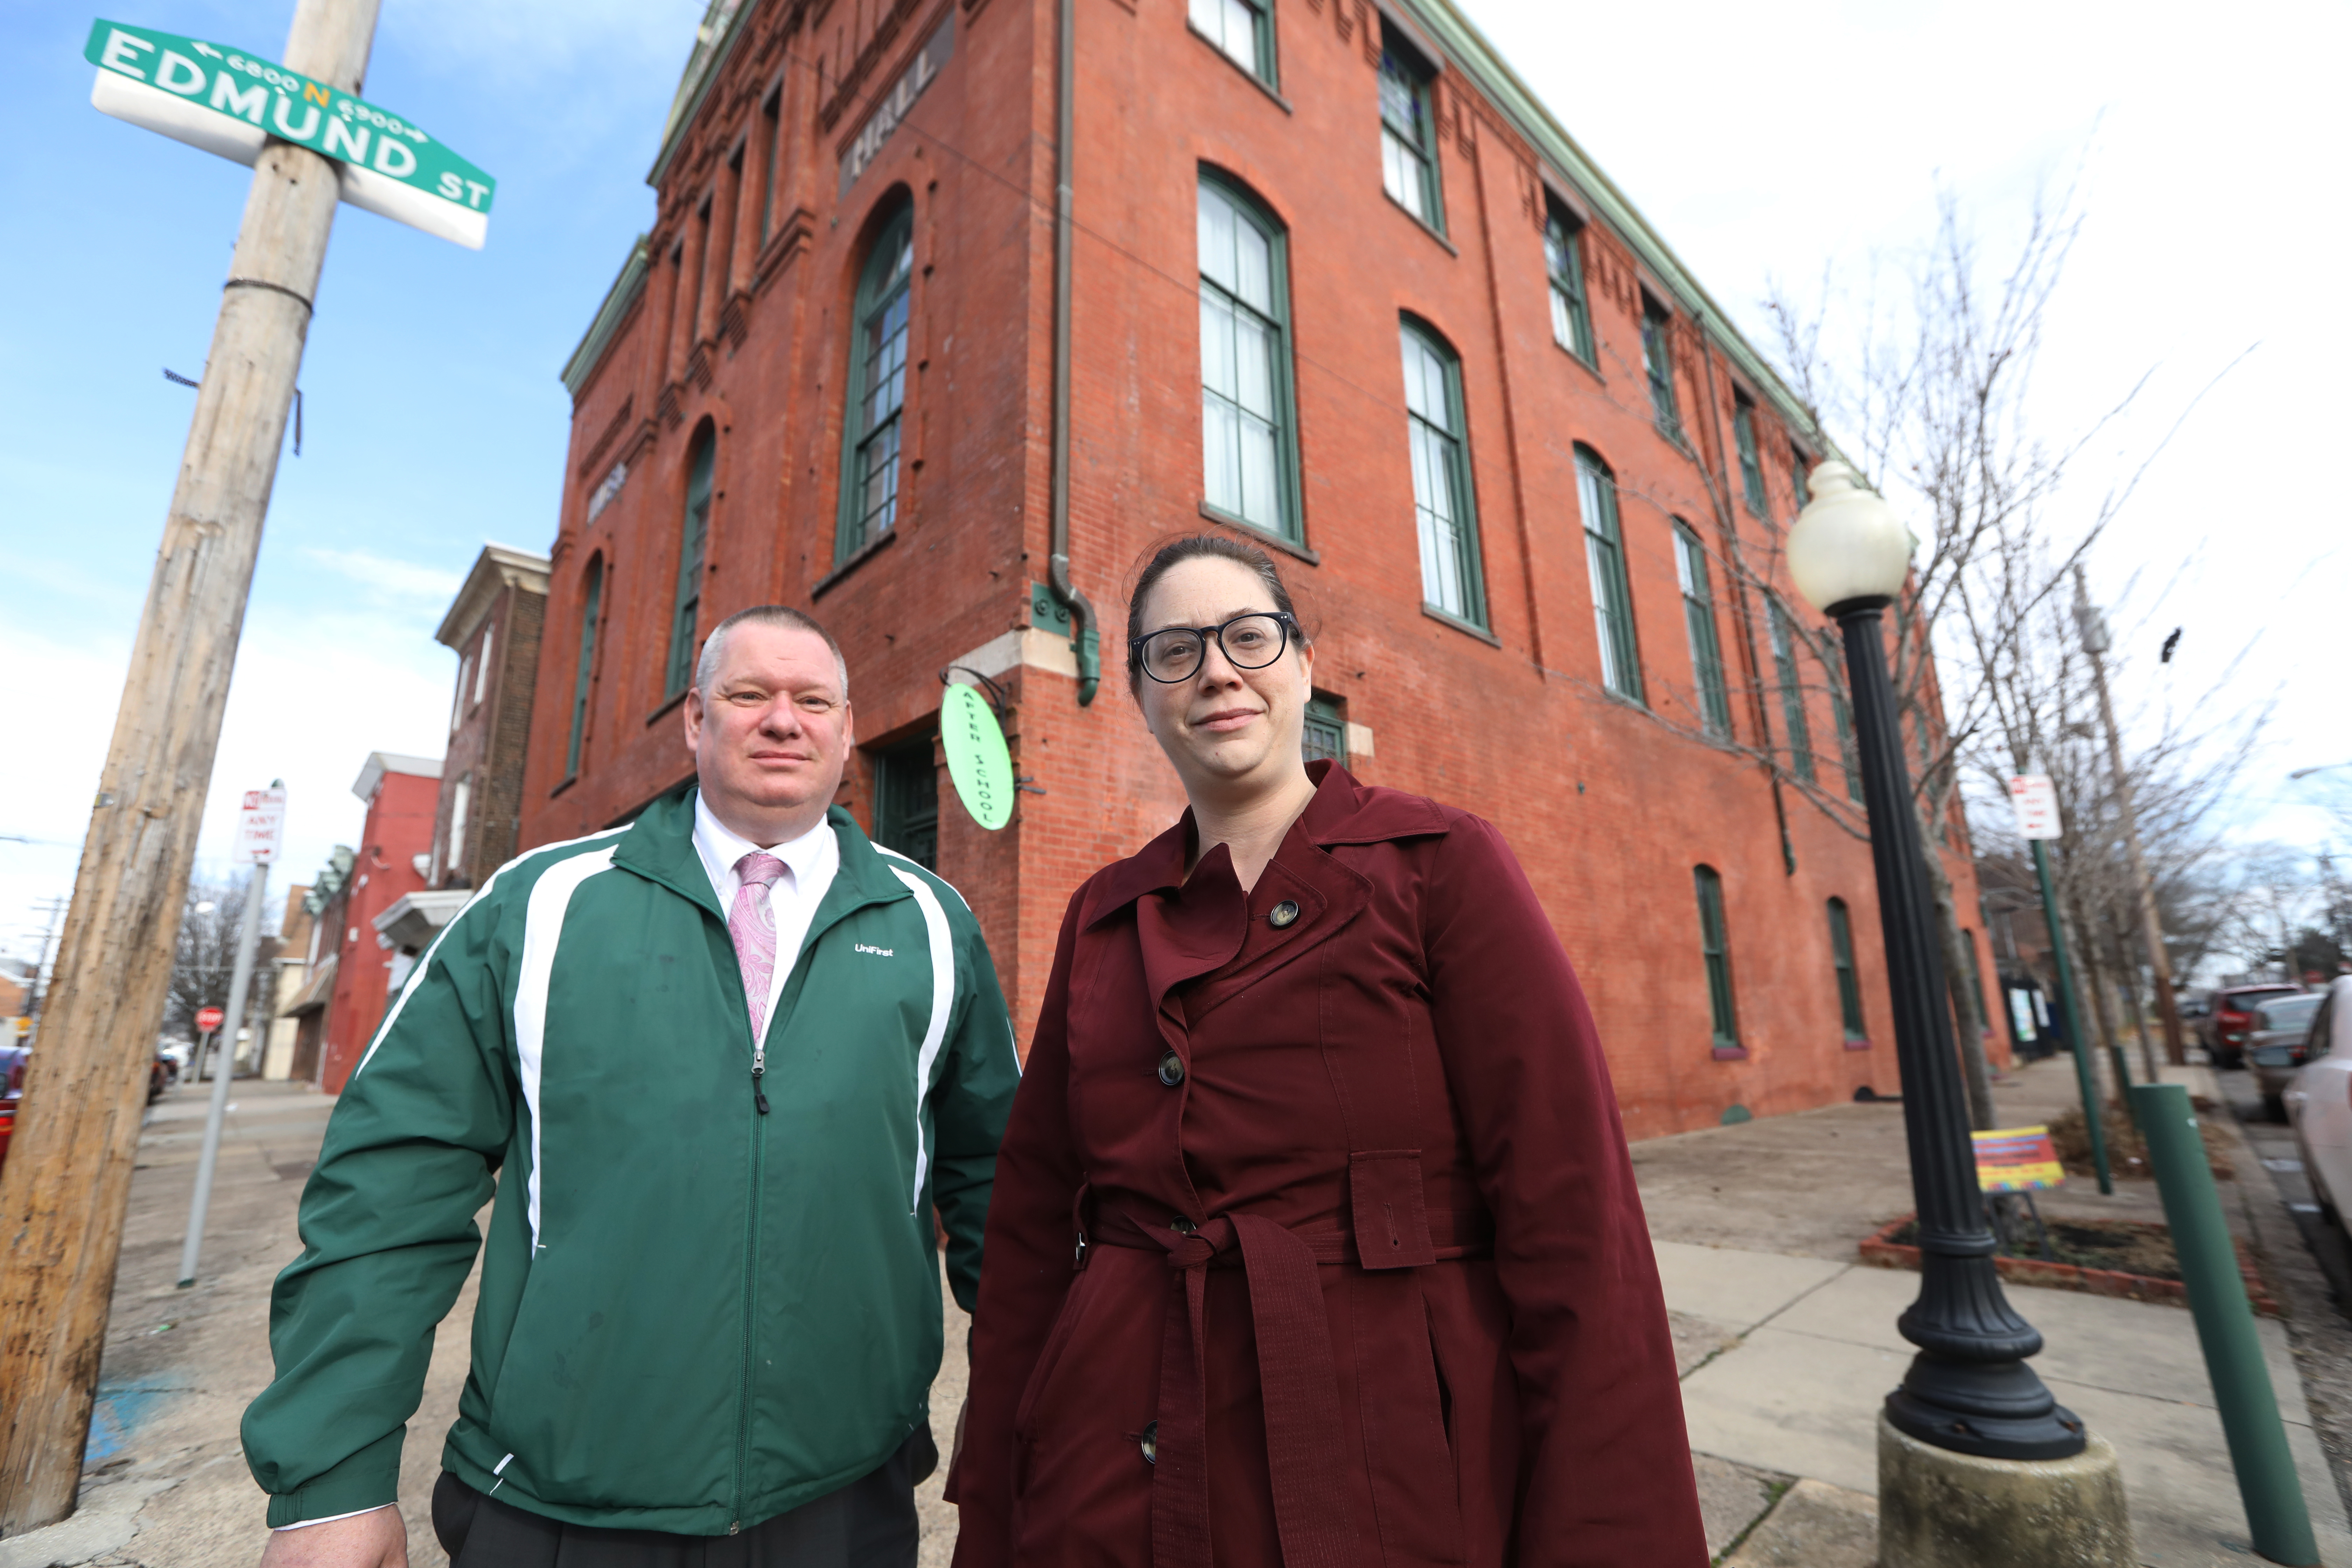 That controversial sex-positive club in Tacony never closed and neighbors no longer care picture